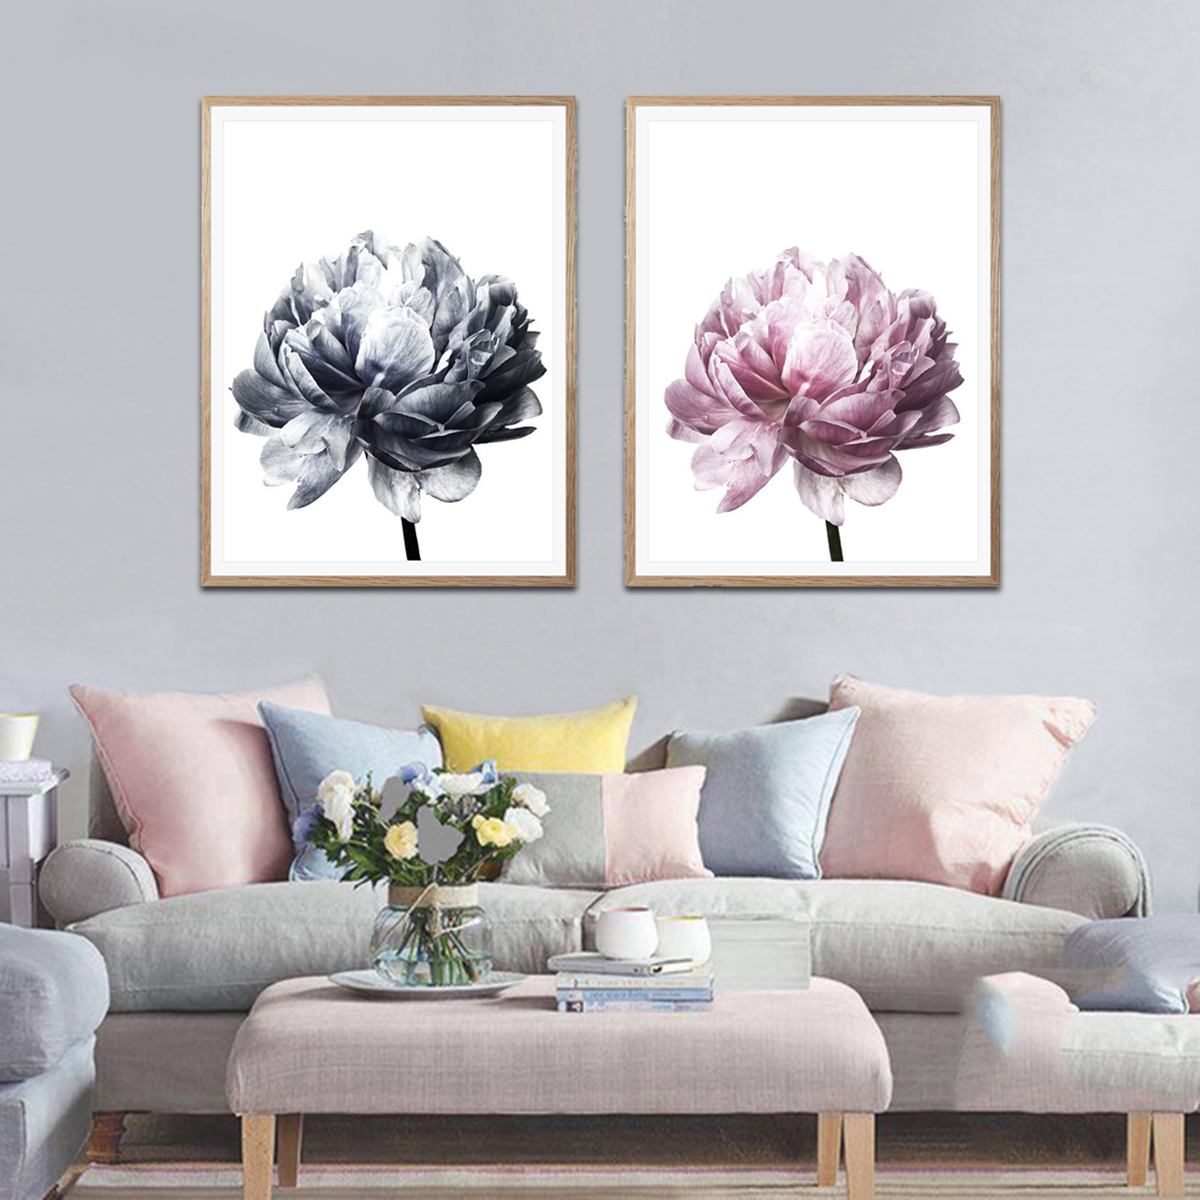 20x3030x40cm-Flower-Modern-Wall-Art-Canvas-Paintings-Picture-Home-Decor-Mural-Poster-with-Frame-1632681-3